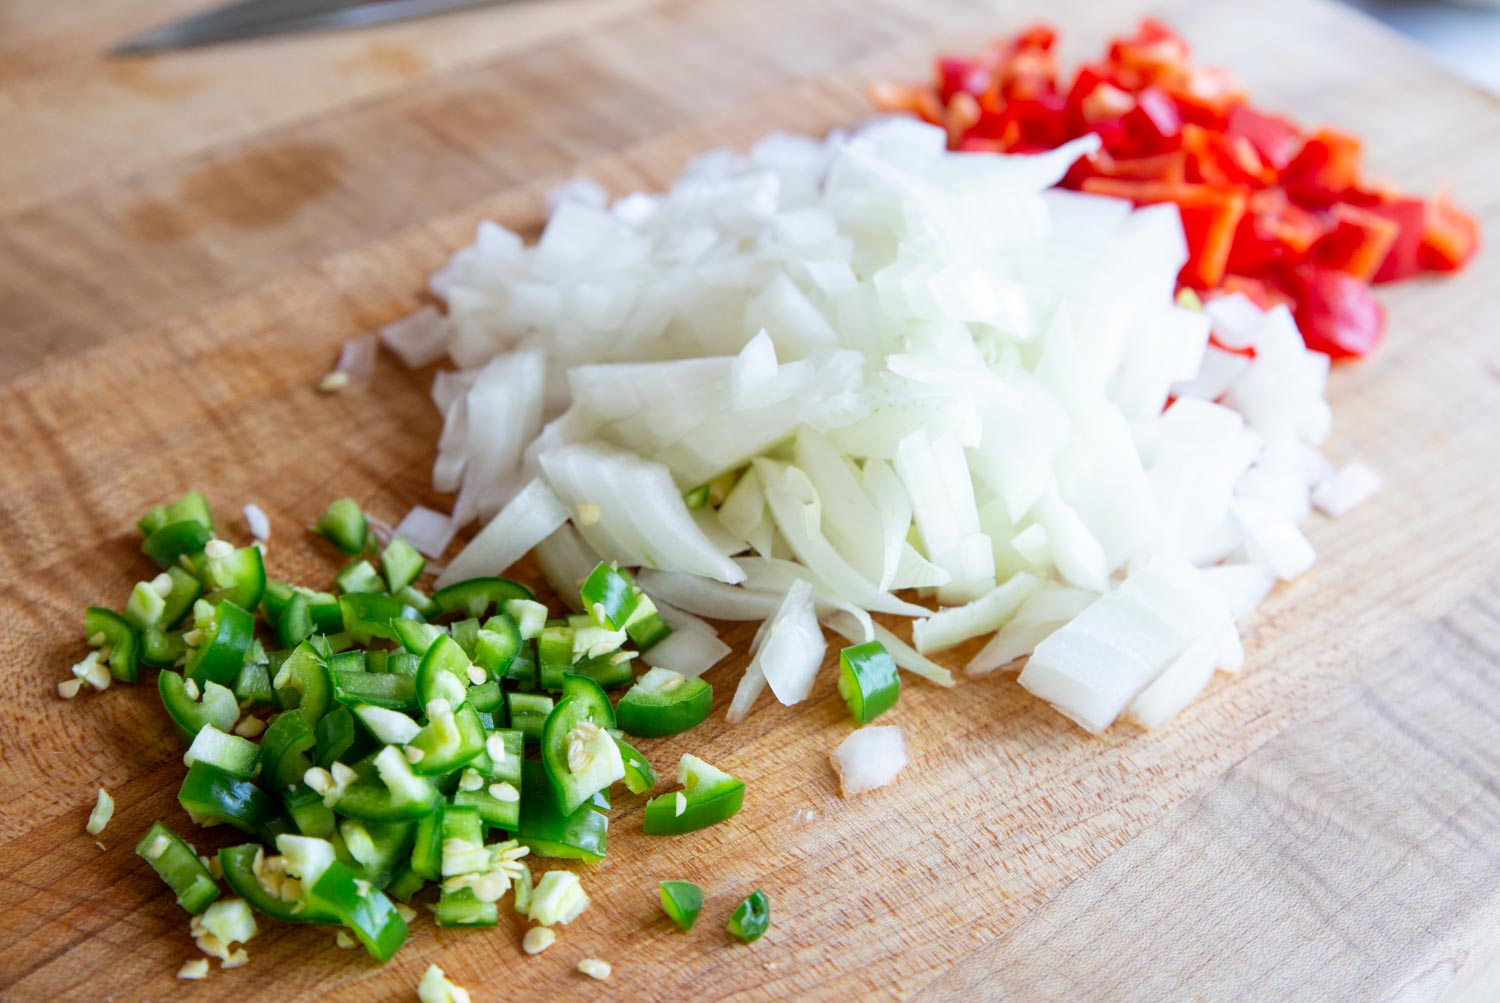 Diced jalapeno, onion, and red bell pepper on a cutting board.